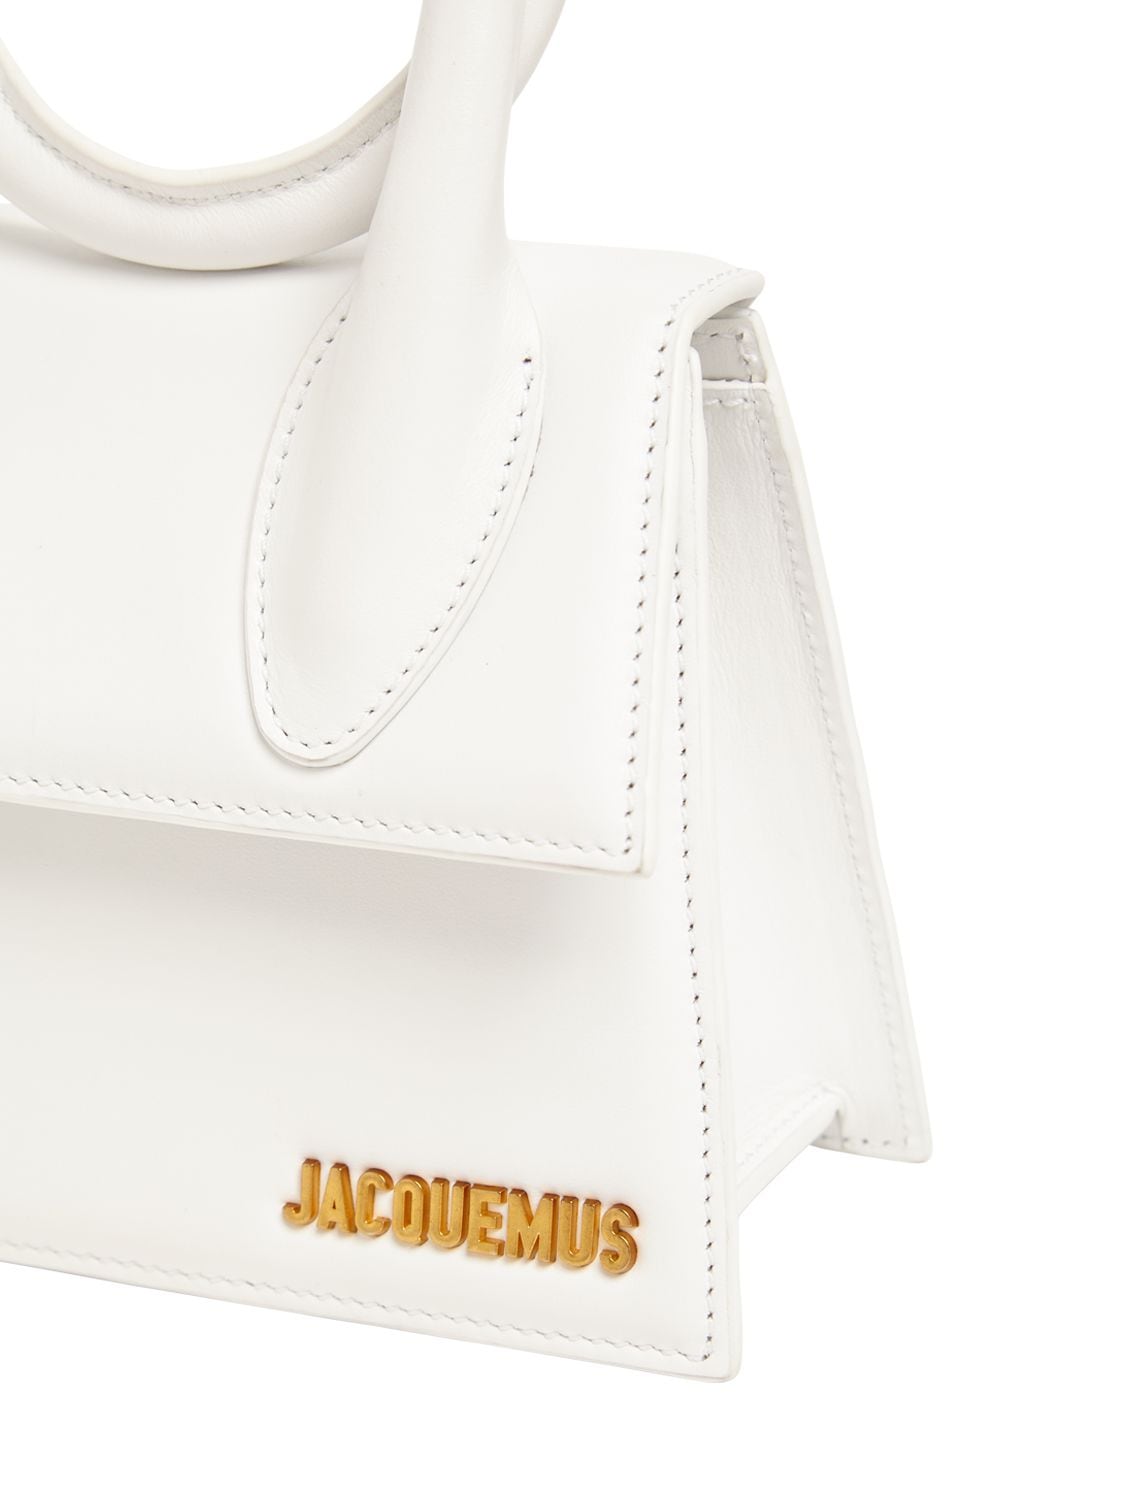 Shop Jacquemus Le Chiquito Noeud Leather Top Handle Bag In White